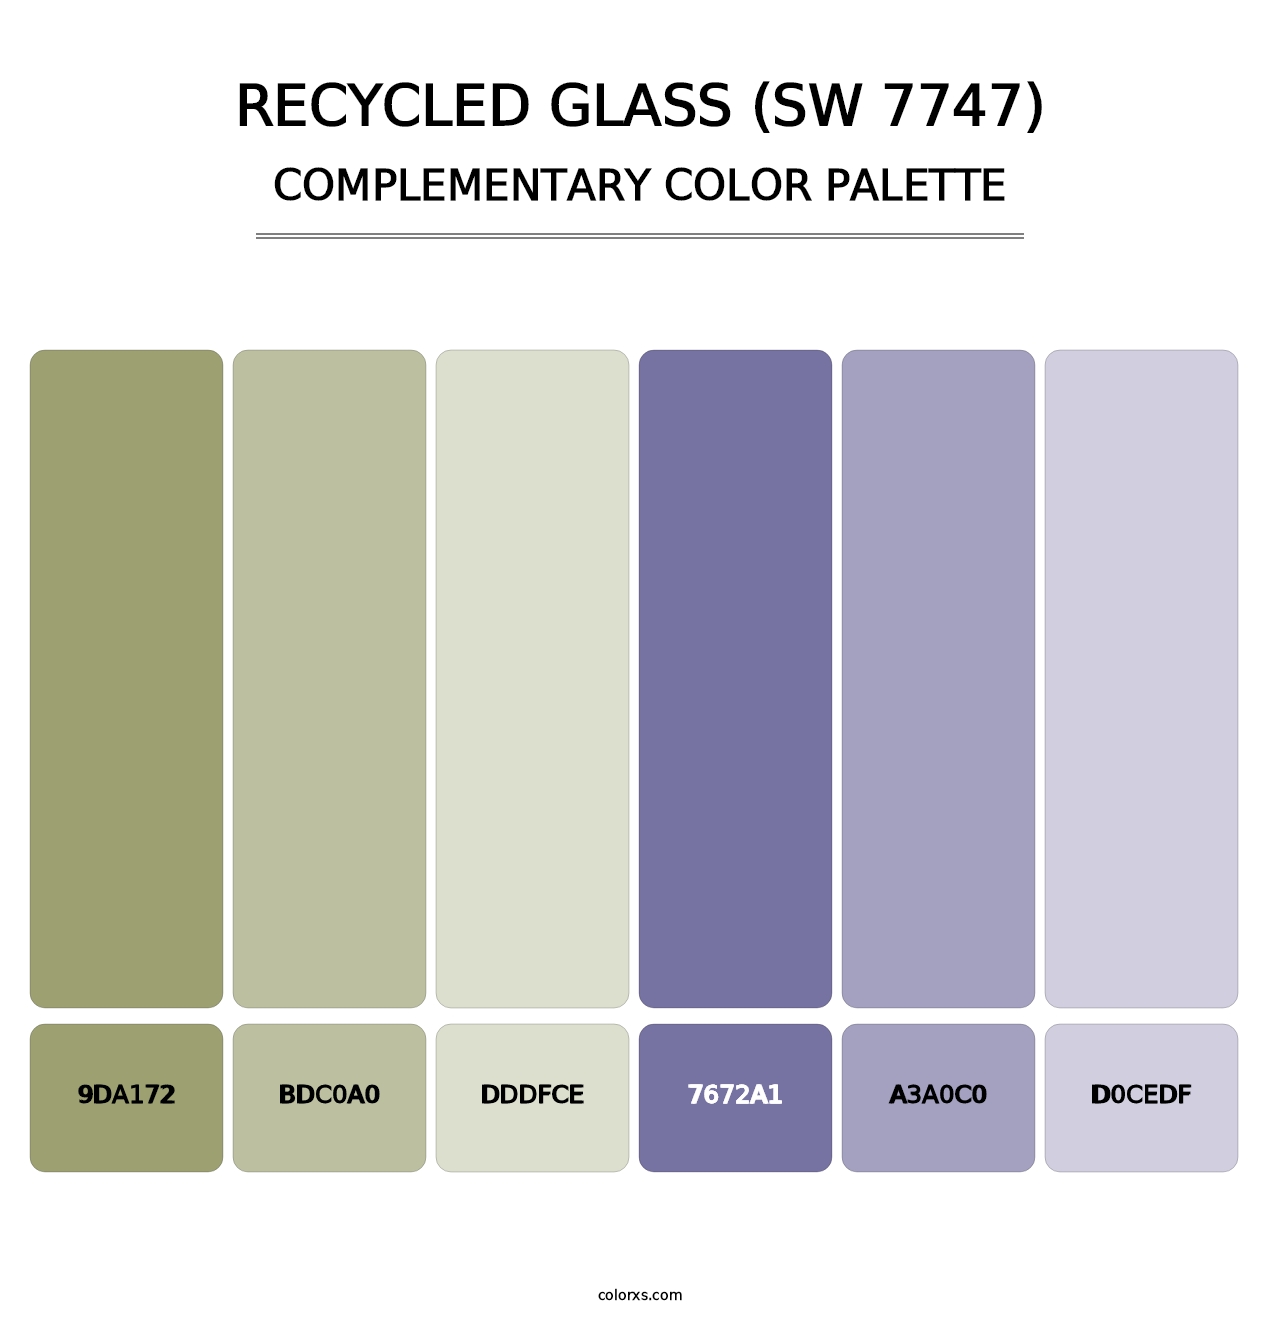 Recycled Glass (SW 7747) - Complementary Color Palette